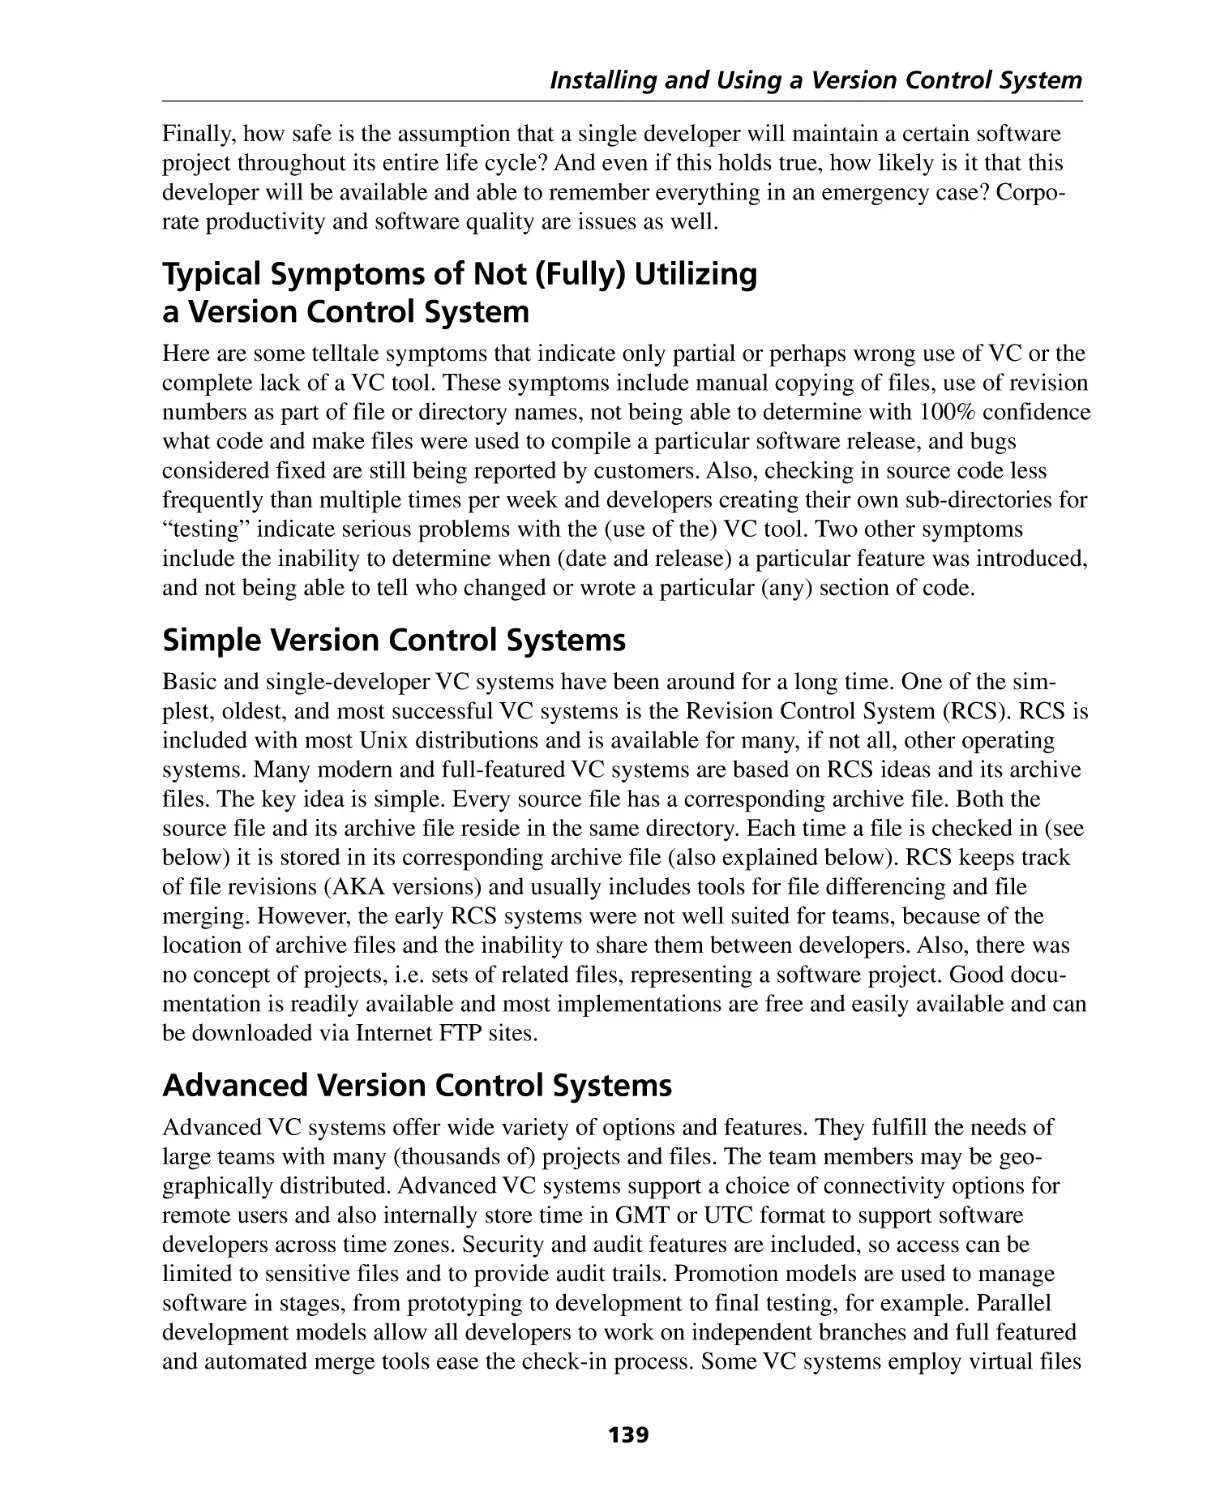 Typical Symptoms of Not (Fully) Utilizing a Version Control System
Simple Version Control Systems
Advanced Version Control Systems